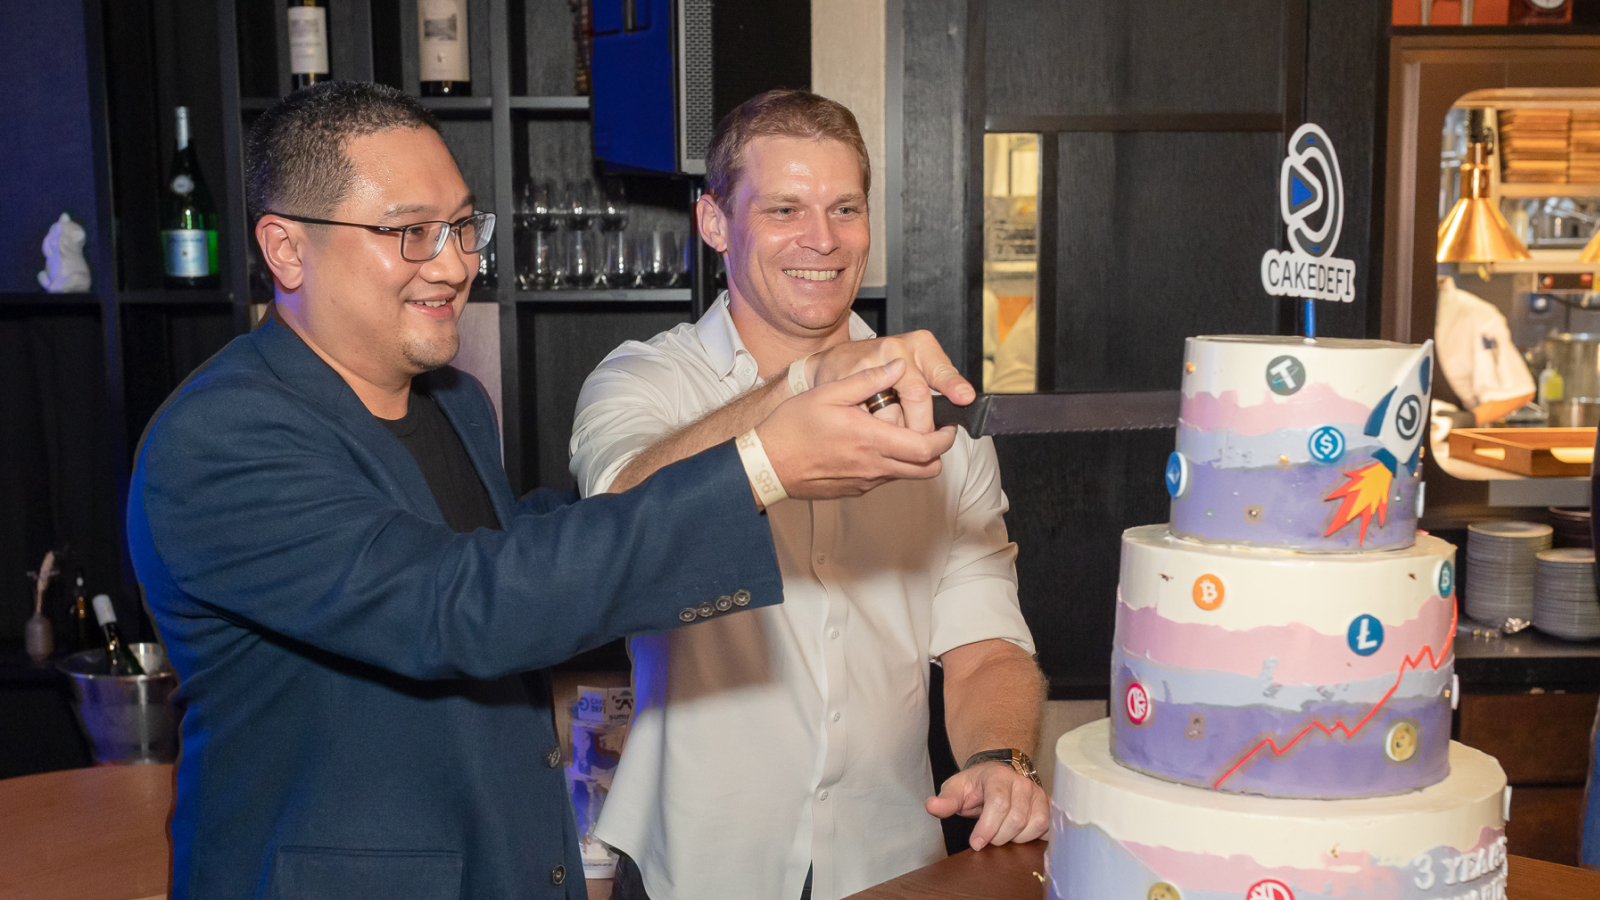 CAKE DEFI YEAR 2022 IN REVIEW: A Quick Look at Our Breakthroughs & Product Launches